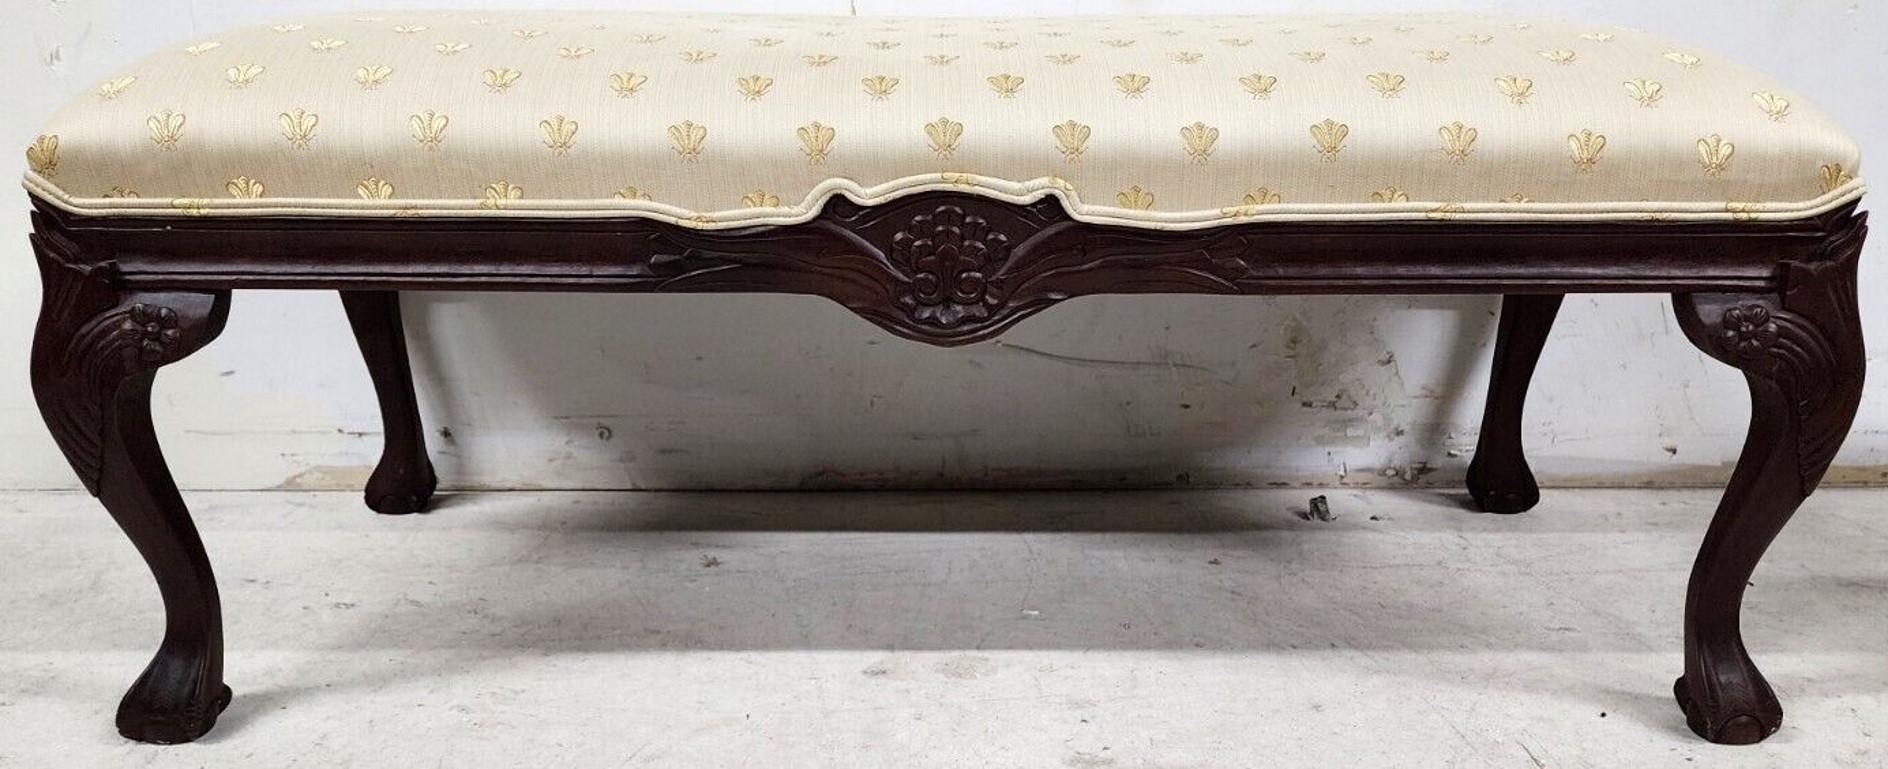 Offering One Of Our Recent Palm Beach Estate Fine Furniture Acquisitions Of A French Provincial Louis XV Bench with Carved Ball and Claw feet and Woven Bees Fabric by ANDRE ORIGINALS
The Bees are woven into the satin cotton fabric. It is not a